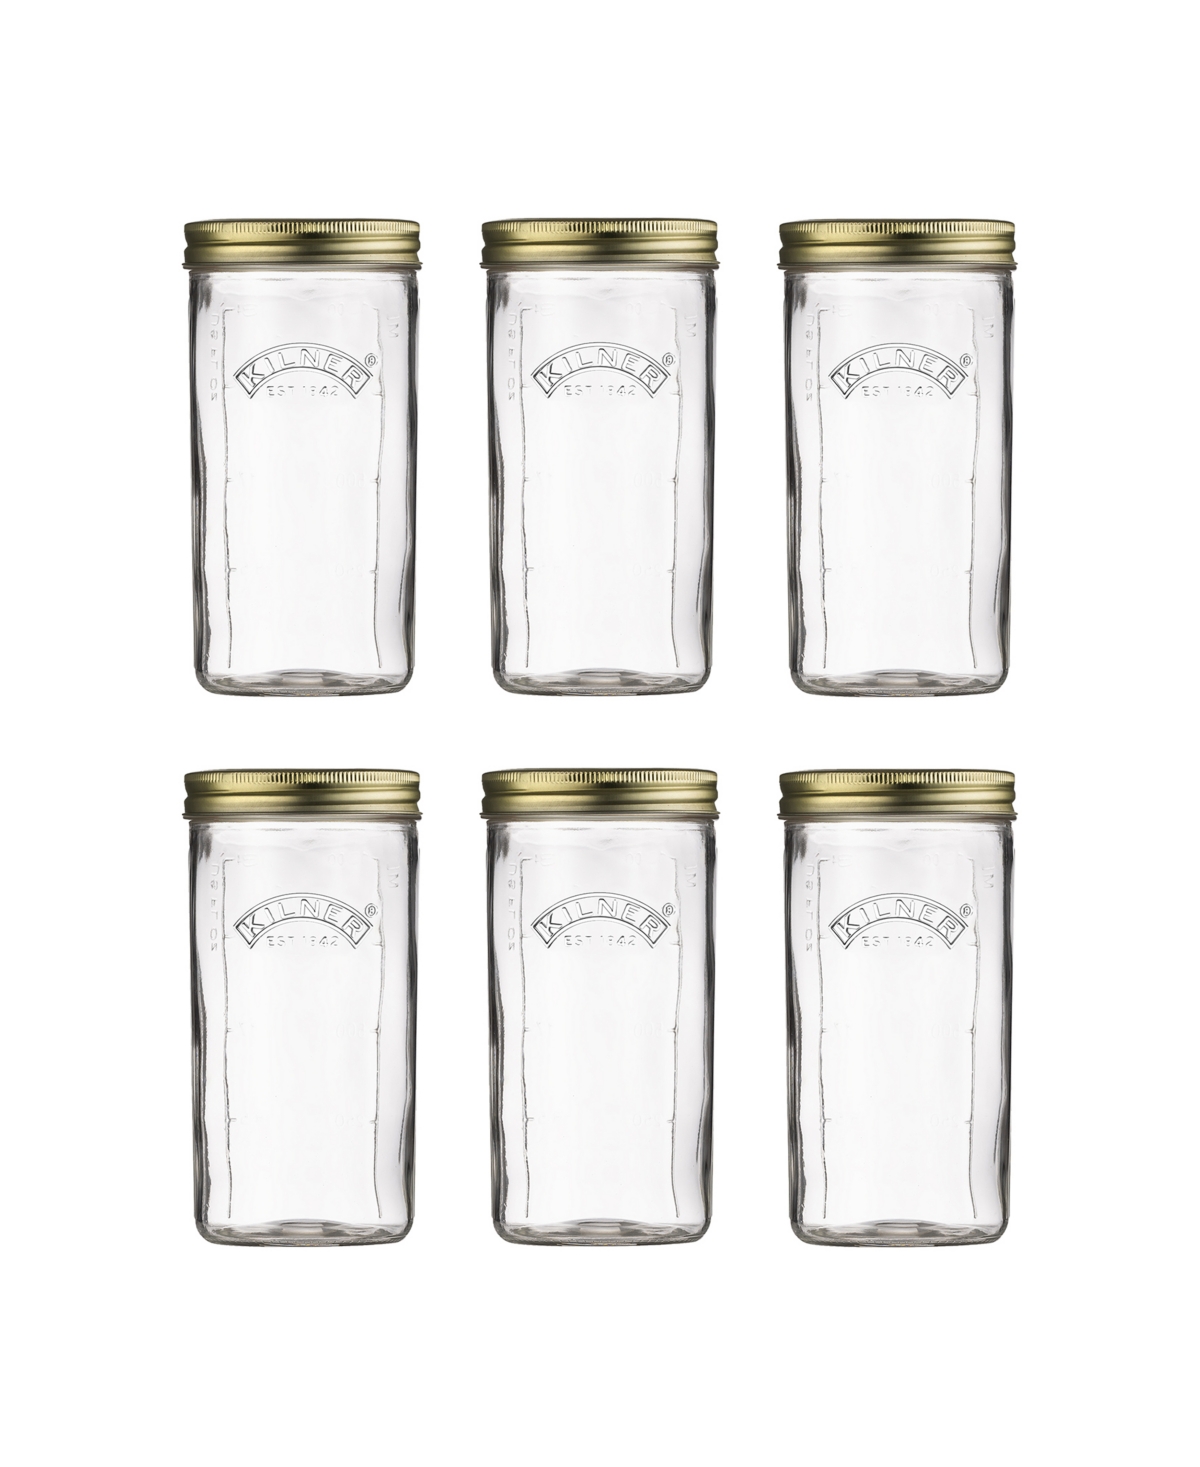 Wide Mouth Canning Jar 34 oz, Set of 6 - Clear